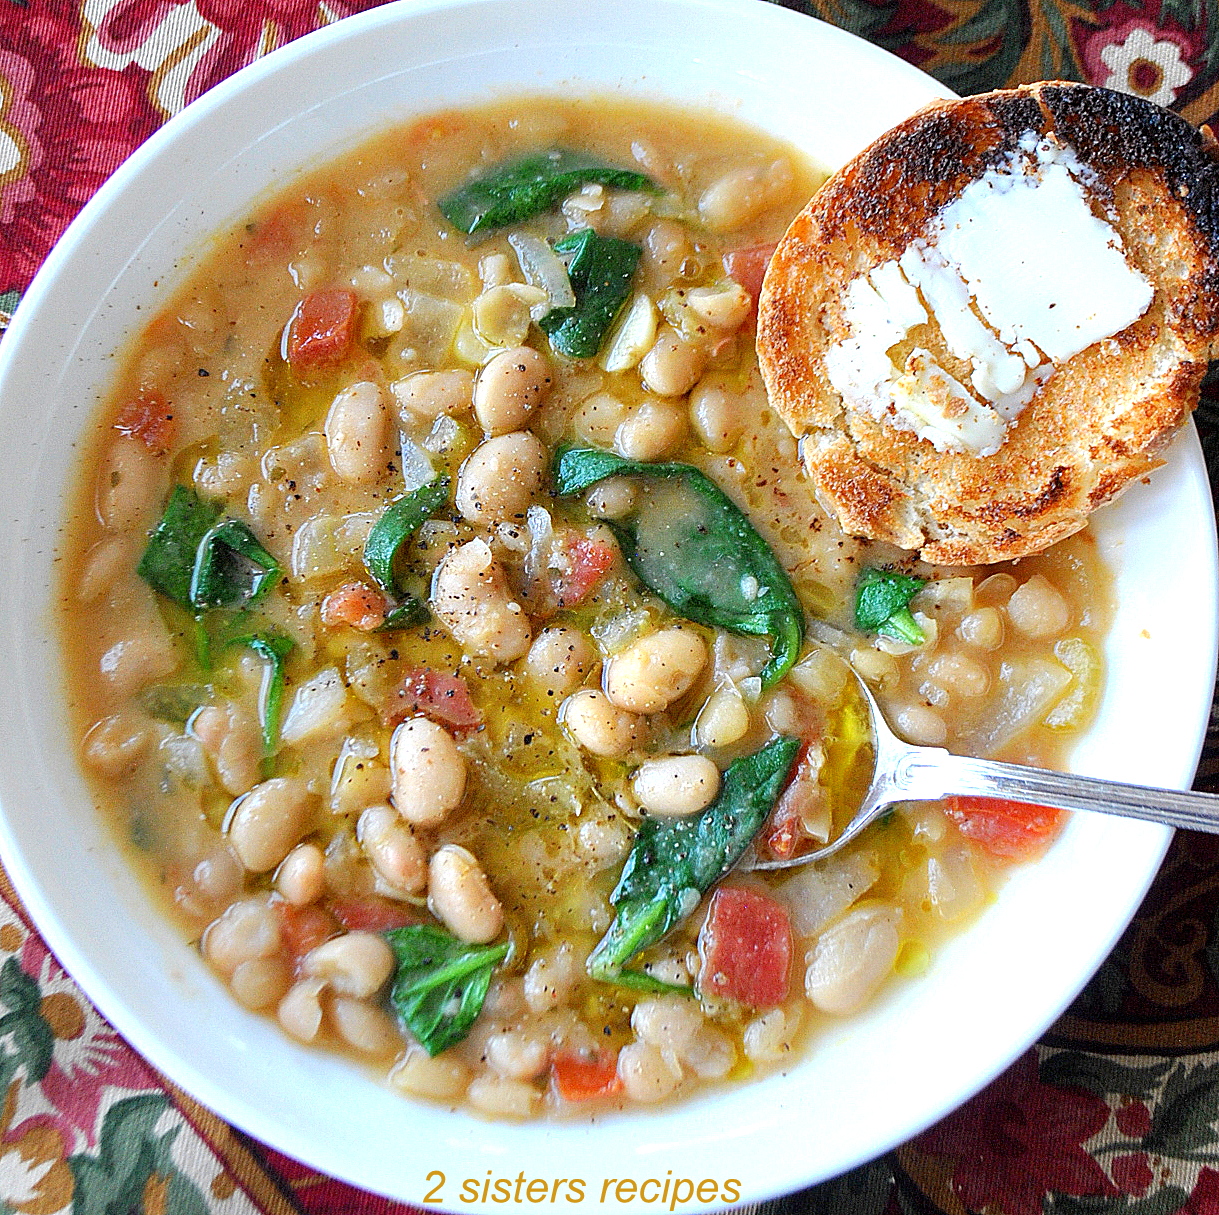 A bowl of soup loaded with white beans, spinach and a slice of toasty bread.